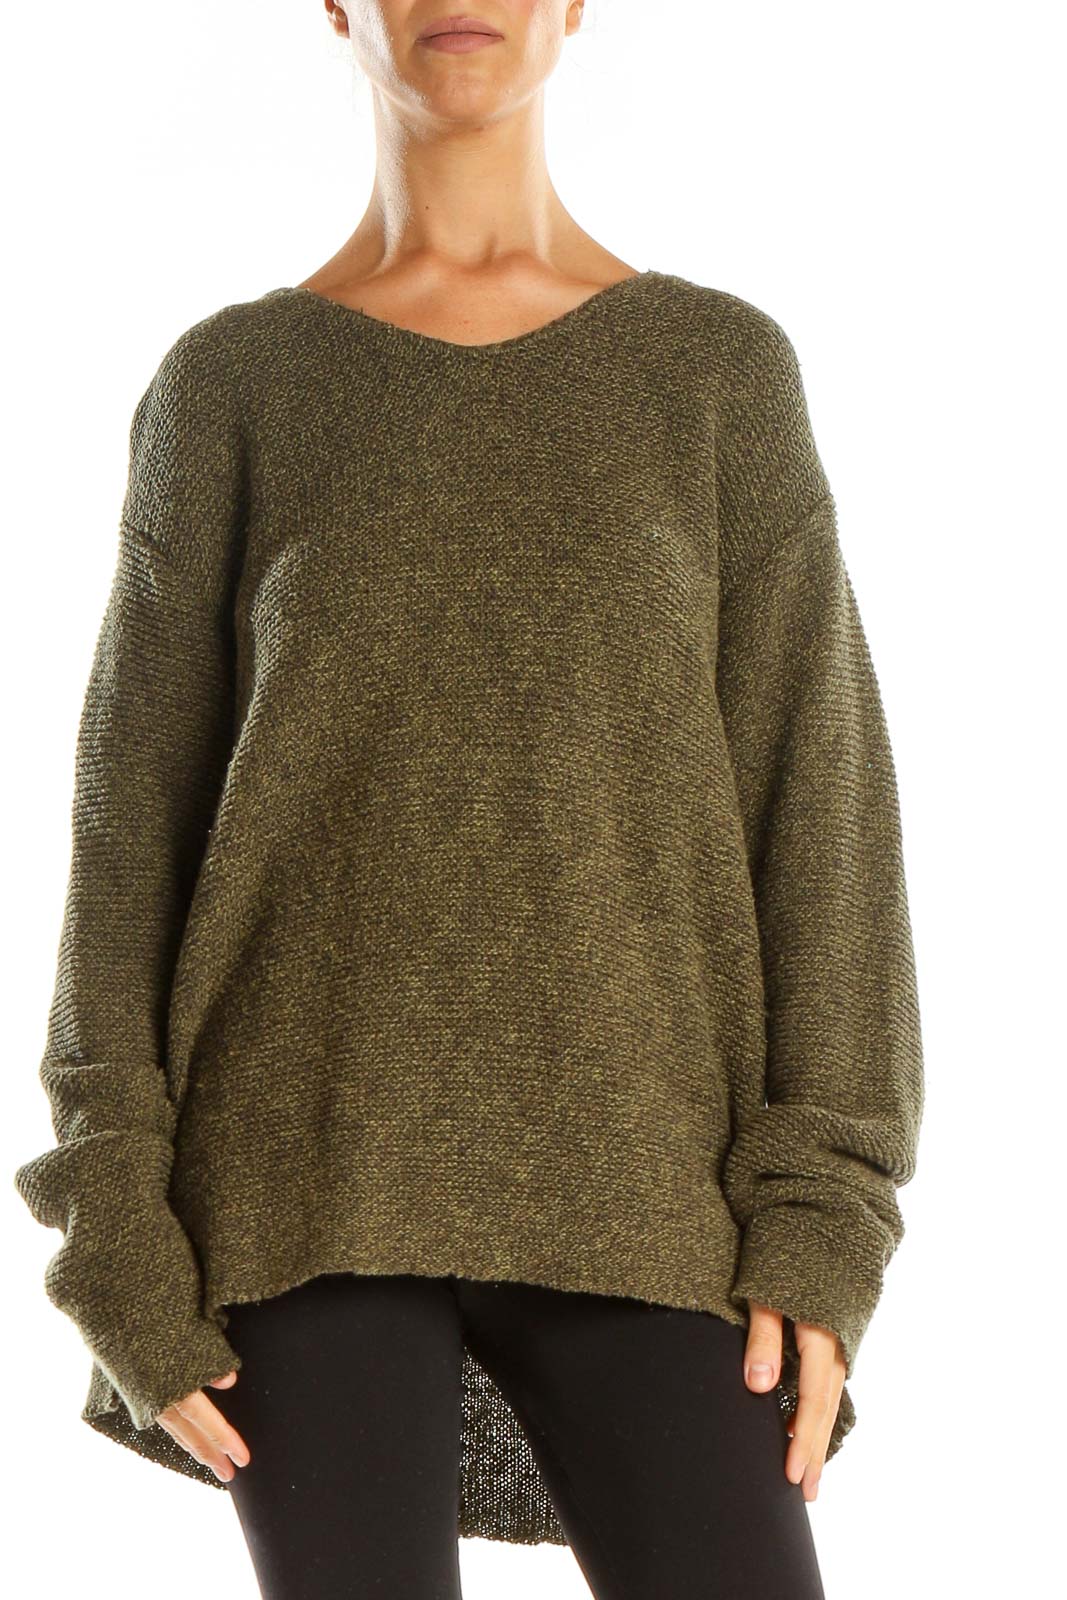 Green Textured Classic Sweater Front